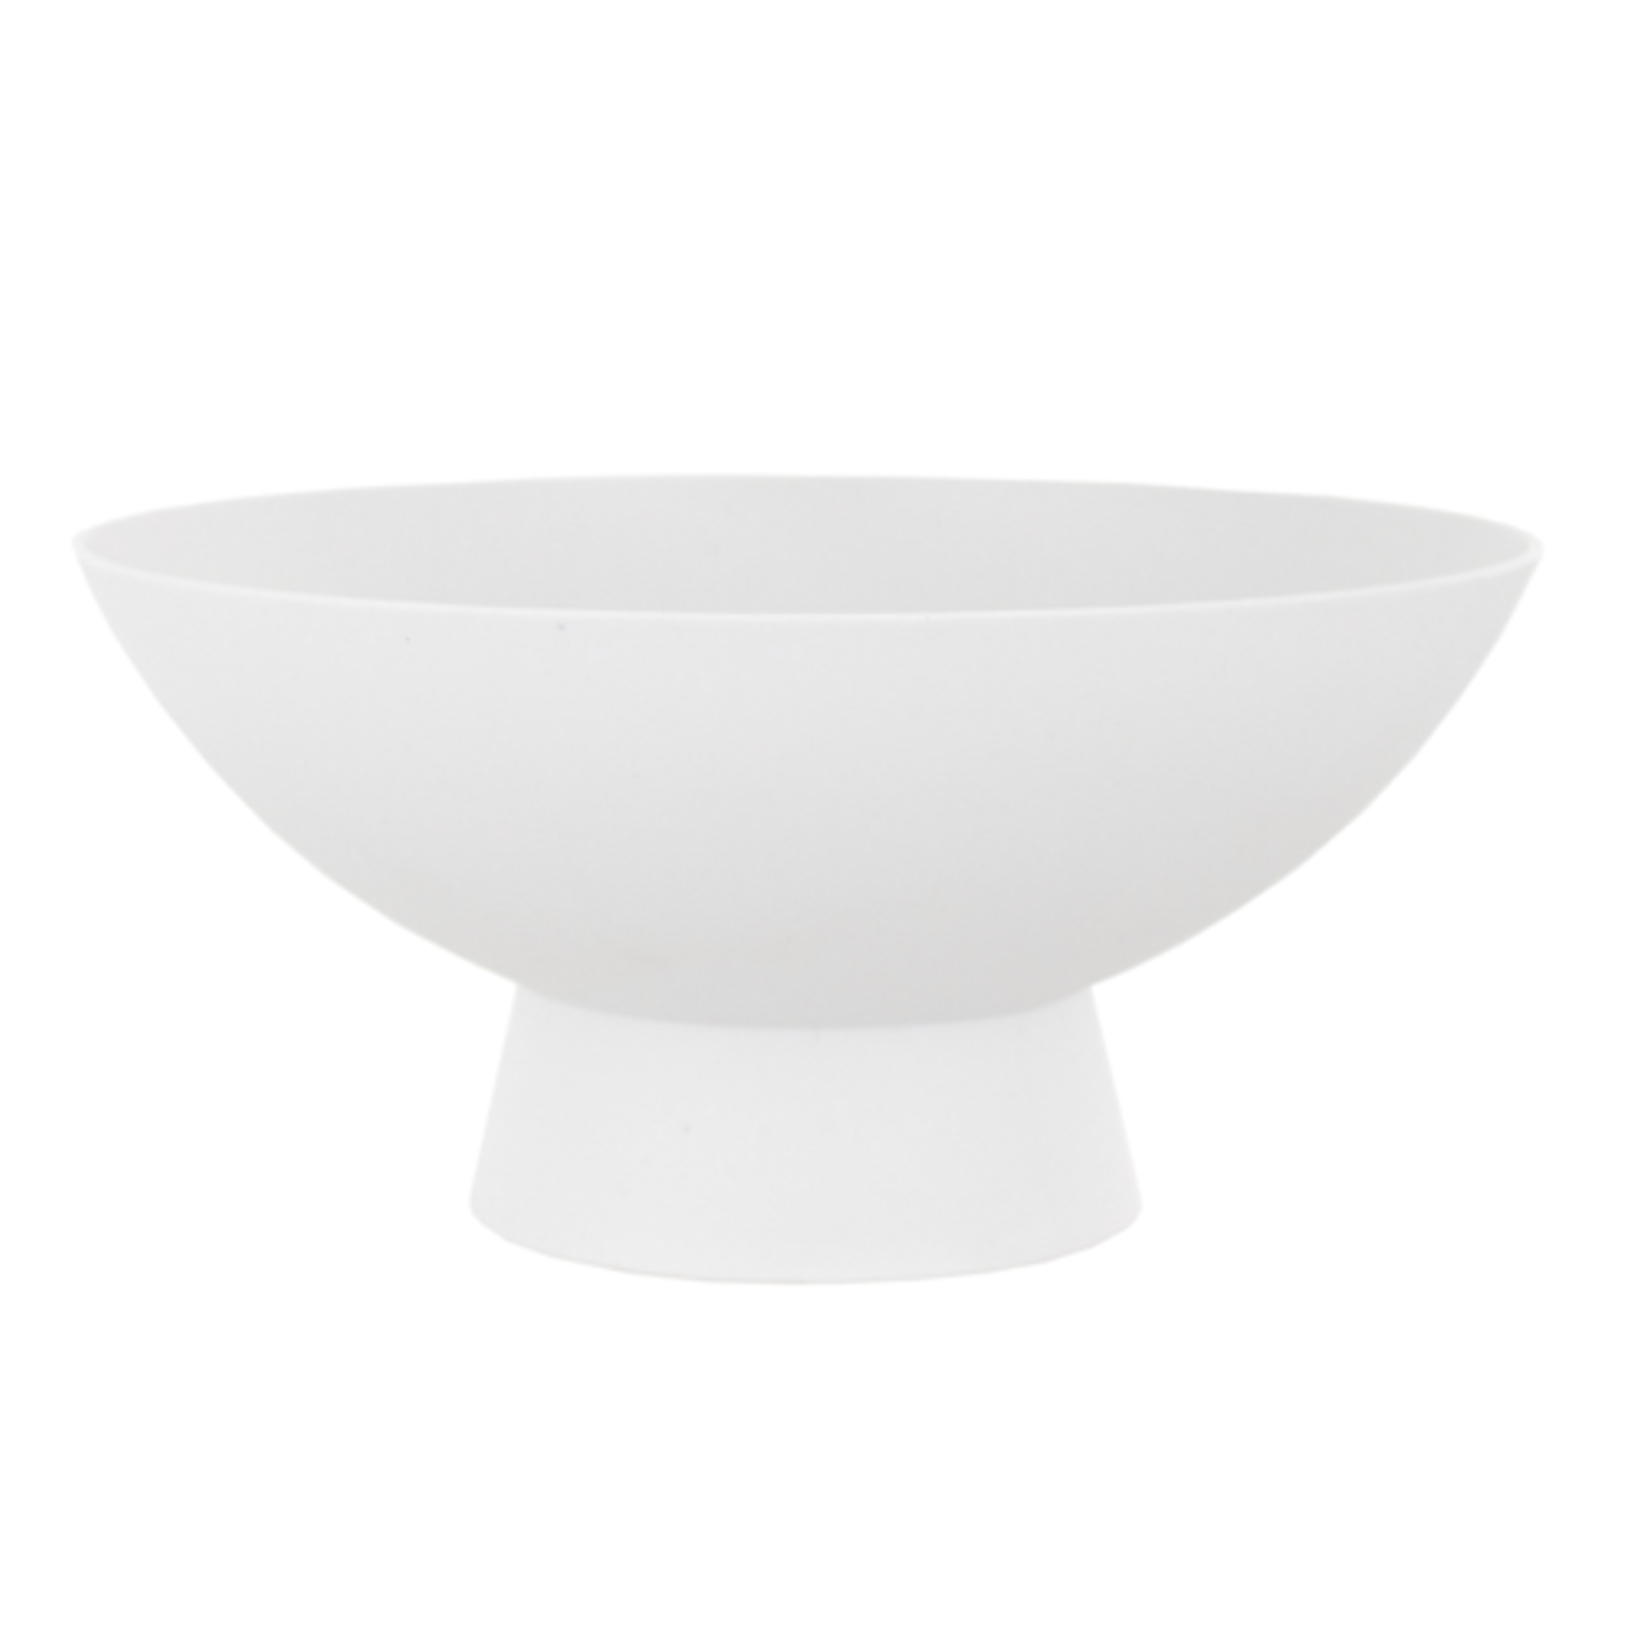 5.75”h x 12”d WHITE DEMI FOOTED BOWL